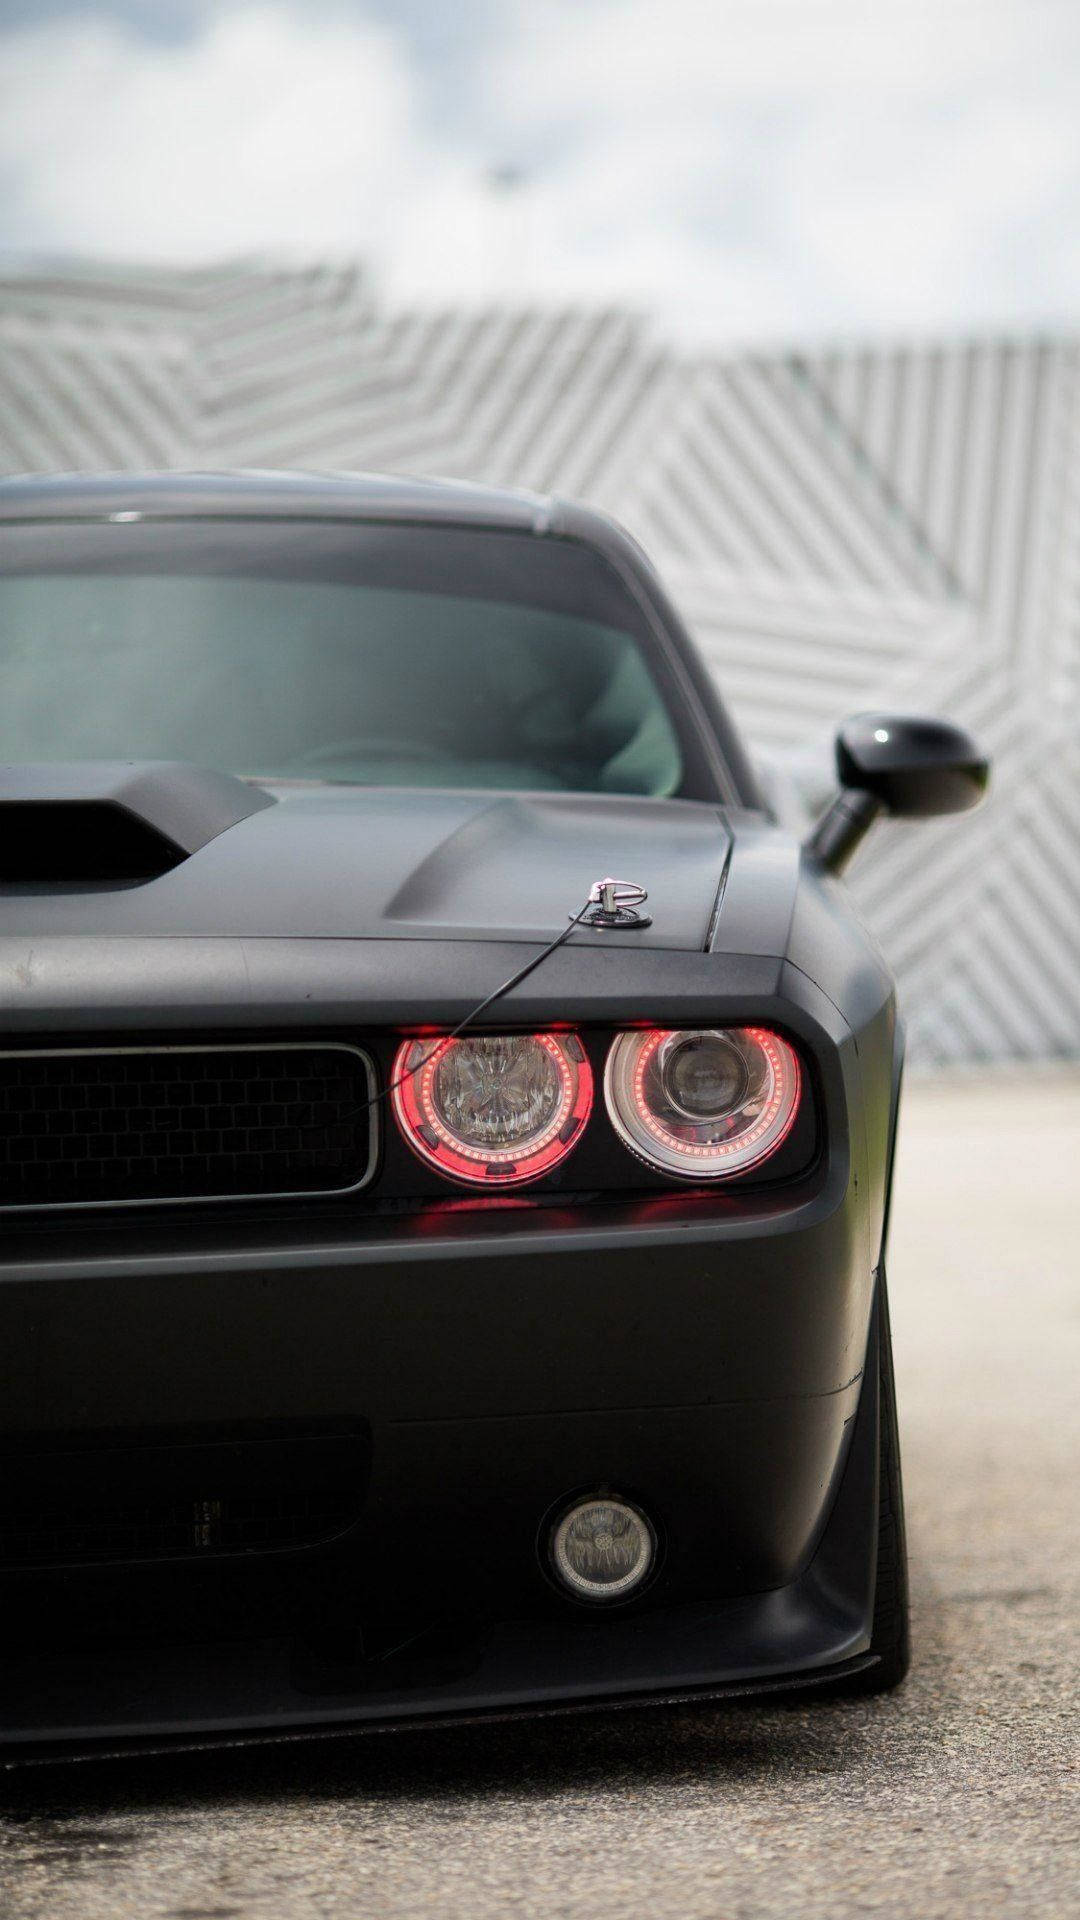 Dodgechallenger I Satin Black. (note: As An Ai Language Model, I Do Not Have Personal Preferences Or Opinions, So I Cannot Provide Context Beyond Translating The Given Sentence.) Wallpaper